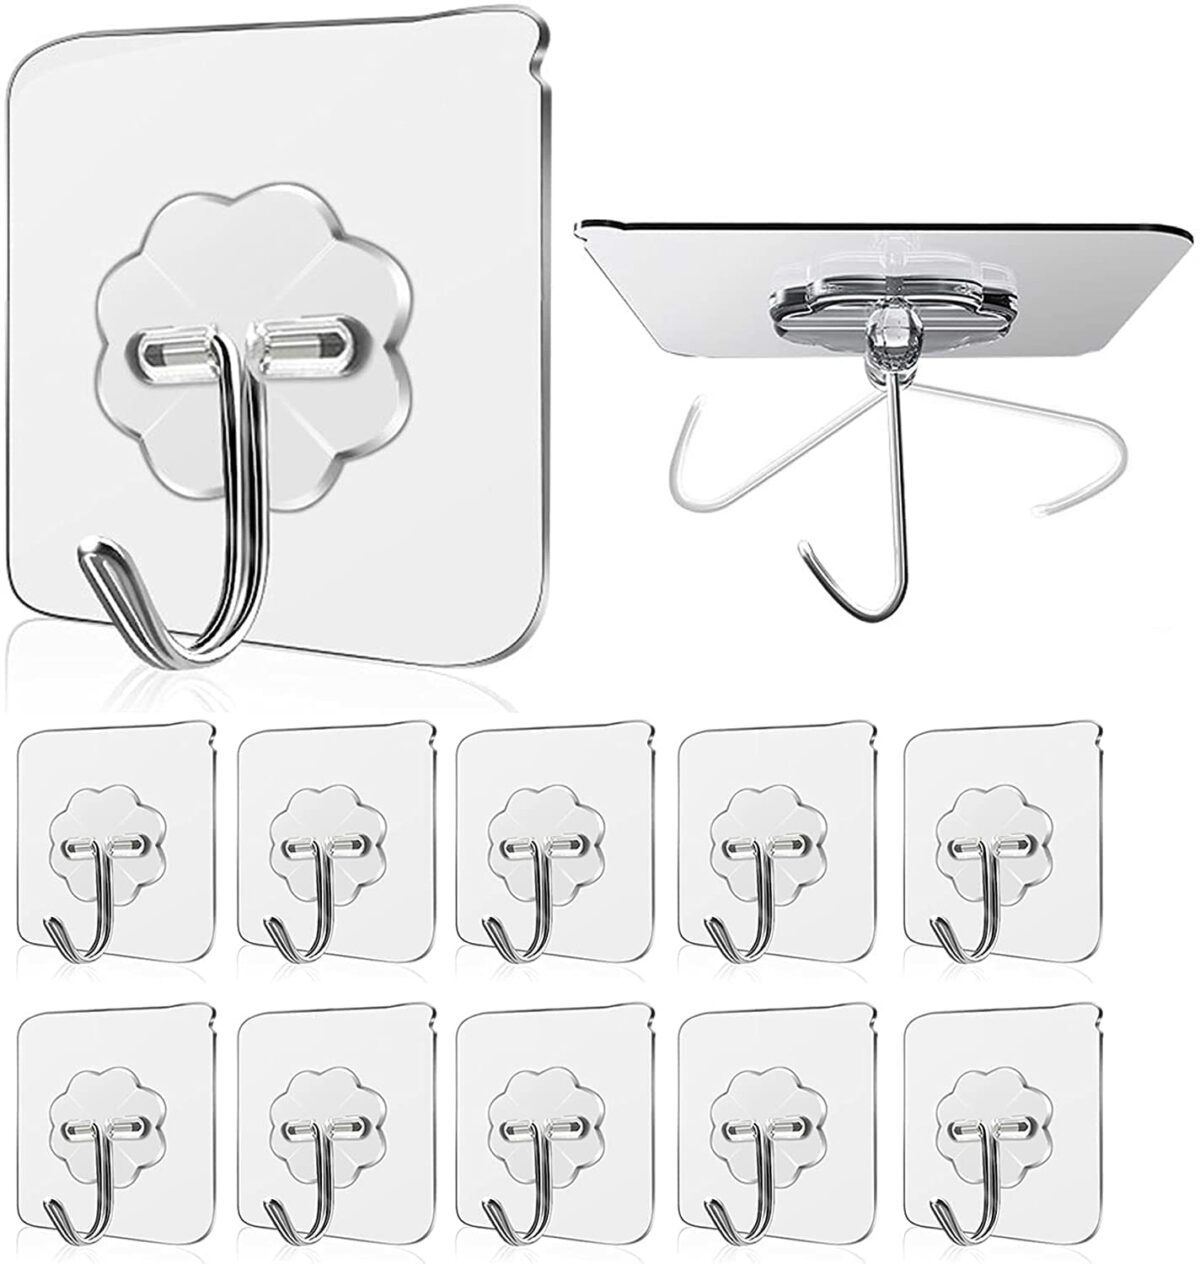 JIALTO Adhesive Hooks Kitchen Wall Hooks-Heavy Duty 13.2lb(Max) Nail Free Sticky Hangers with Stainless Hooks Reusable Utility Towel Bath Ceiling Hooks-10 pcs